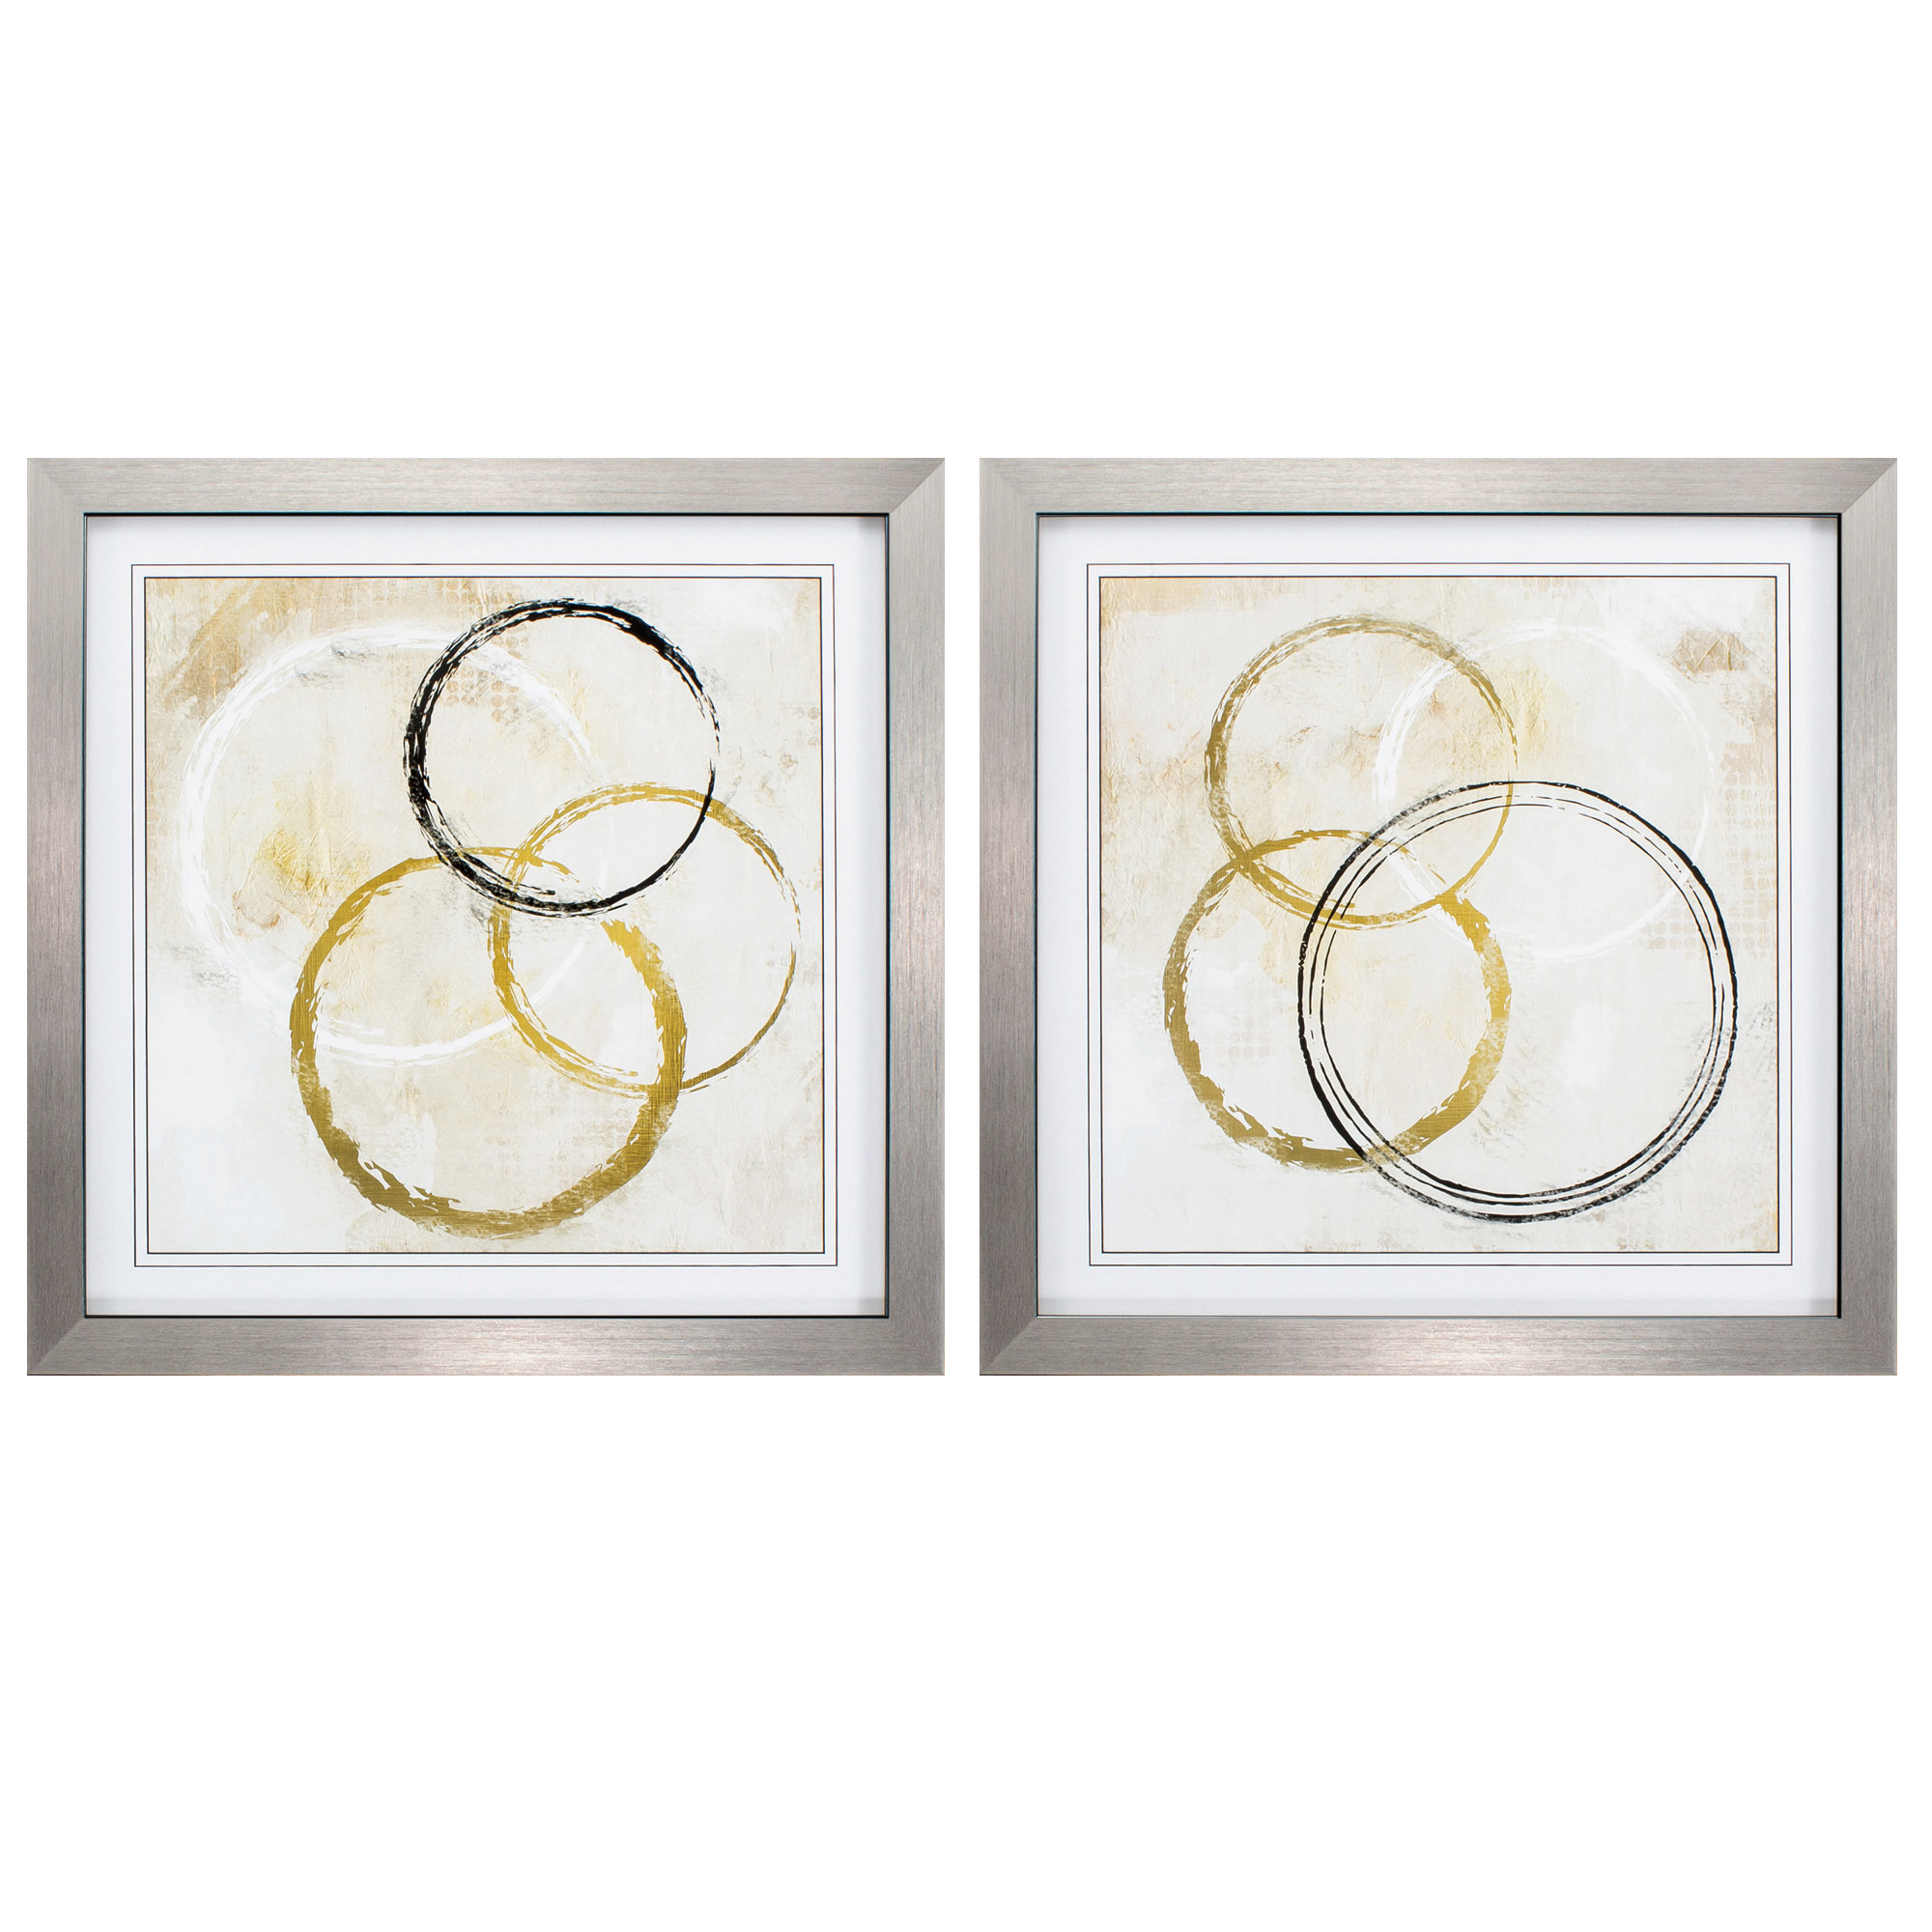 26" X 26" Silver Frame Connections (Set of 2)